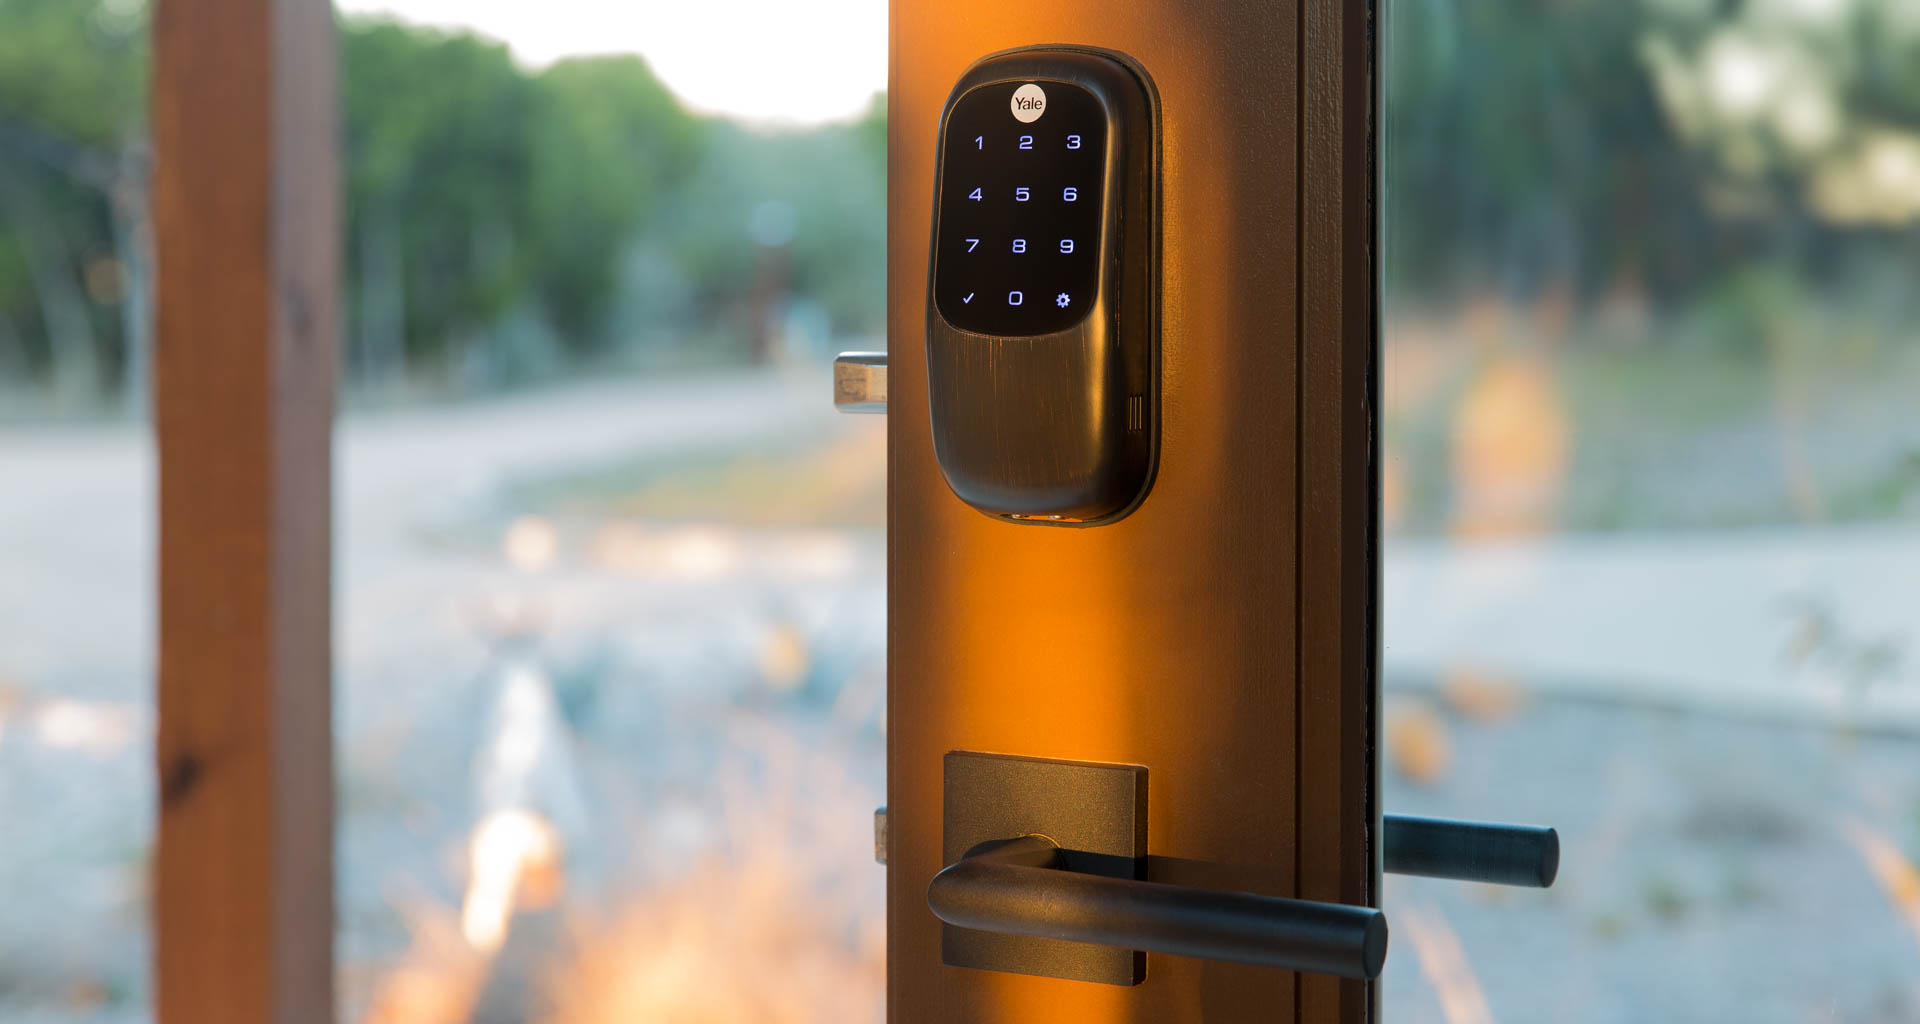 Smart versions of the door lock are a popular choice for many homeowners. This Yale Assure smart lock has an onboard Z-Wave Plus module for secure networking. Image: Digitized House Media.